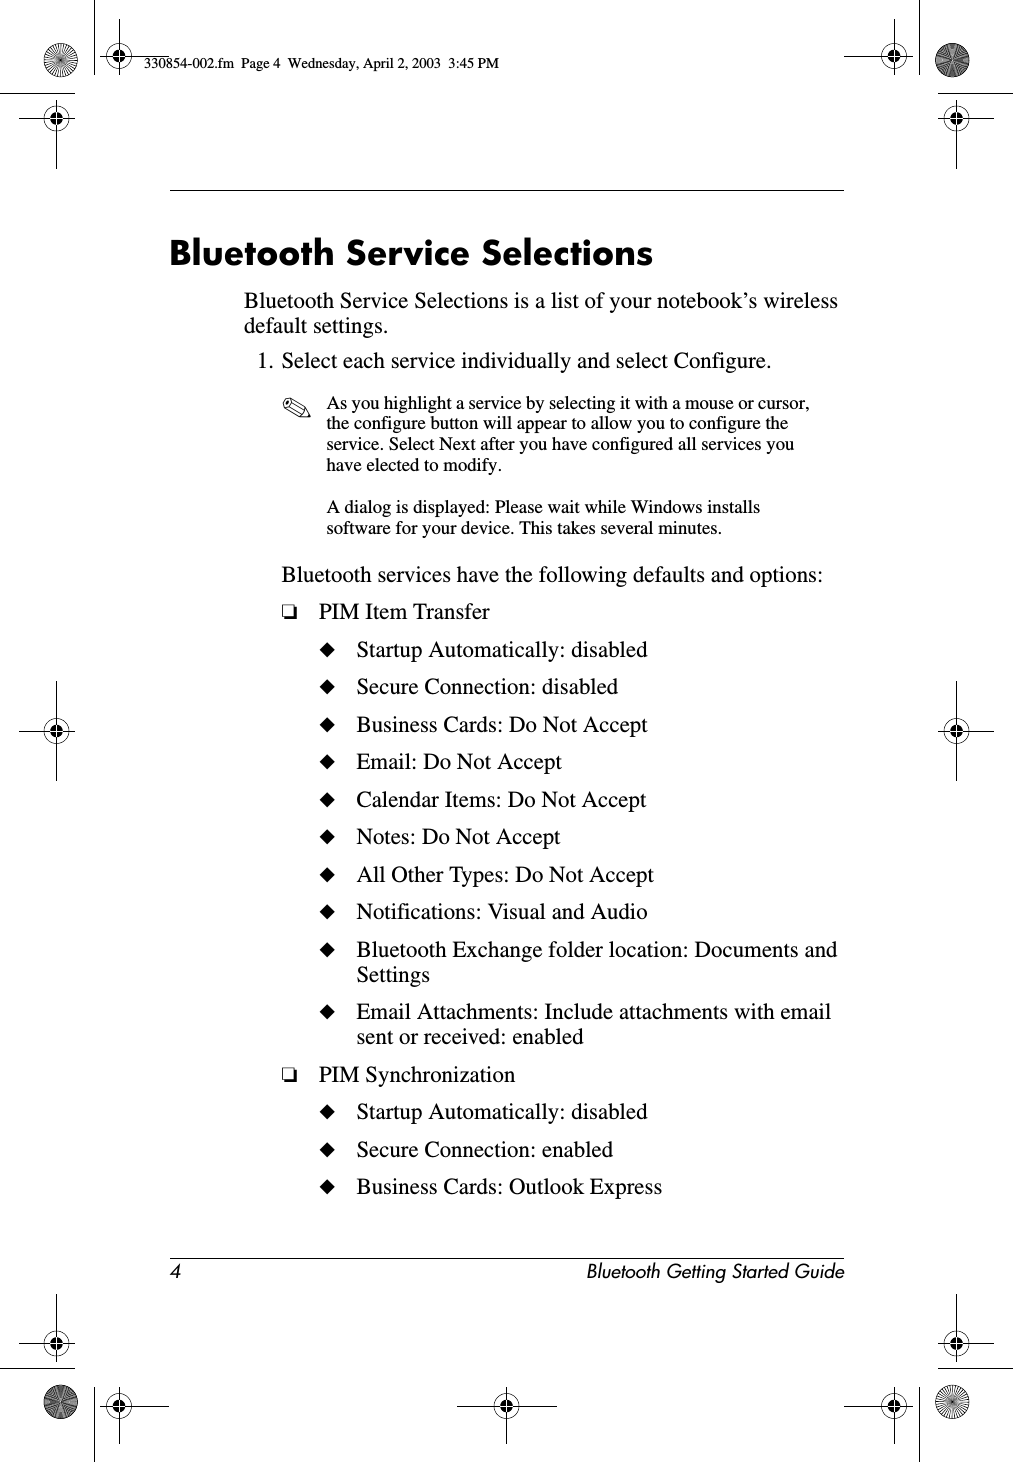 4 Bluetooth Getting Started GuideBluetooth Service SelectionsBluetooth Service Selections is a list of your notebook’s wireless default settings. 1. Select each service individually and select Configure.✎As you highlight a service by selecting it with a mouse or cursor, the configure button will appear to allow you to configure the service. Select Next after you have configured all services you have elected to modify.A dialog is displayed: Please wait while Windows installs software for your device. This takes several minutes.Bluetooth services have the following defaults and options:❏PIM Item Transfer◆Startup Automatically: disabled◆Secure Connection: disabled◆Business Cards: Do Not Accept◆Email: Do Not Accept◆Calendar Items: Do Not Accept◆Notes: Do Not Accept◆All Other Types: Do Not Accept◆Notifications: Visual and Audio◆Bluetooth Exchange folder location: Documents and Settings◆Email Attachments: Include attachments with email sent or received: enabled❏PIM Synchronization◆Startup Automatically: disabled◆Secure Connection: enabled◆Business Cards: Outlook Express330854-002.fm  Page 4  Wednesday, April 2, 2003  3:45 PM